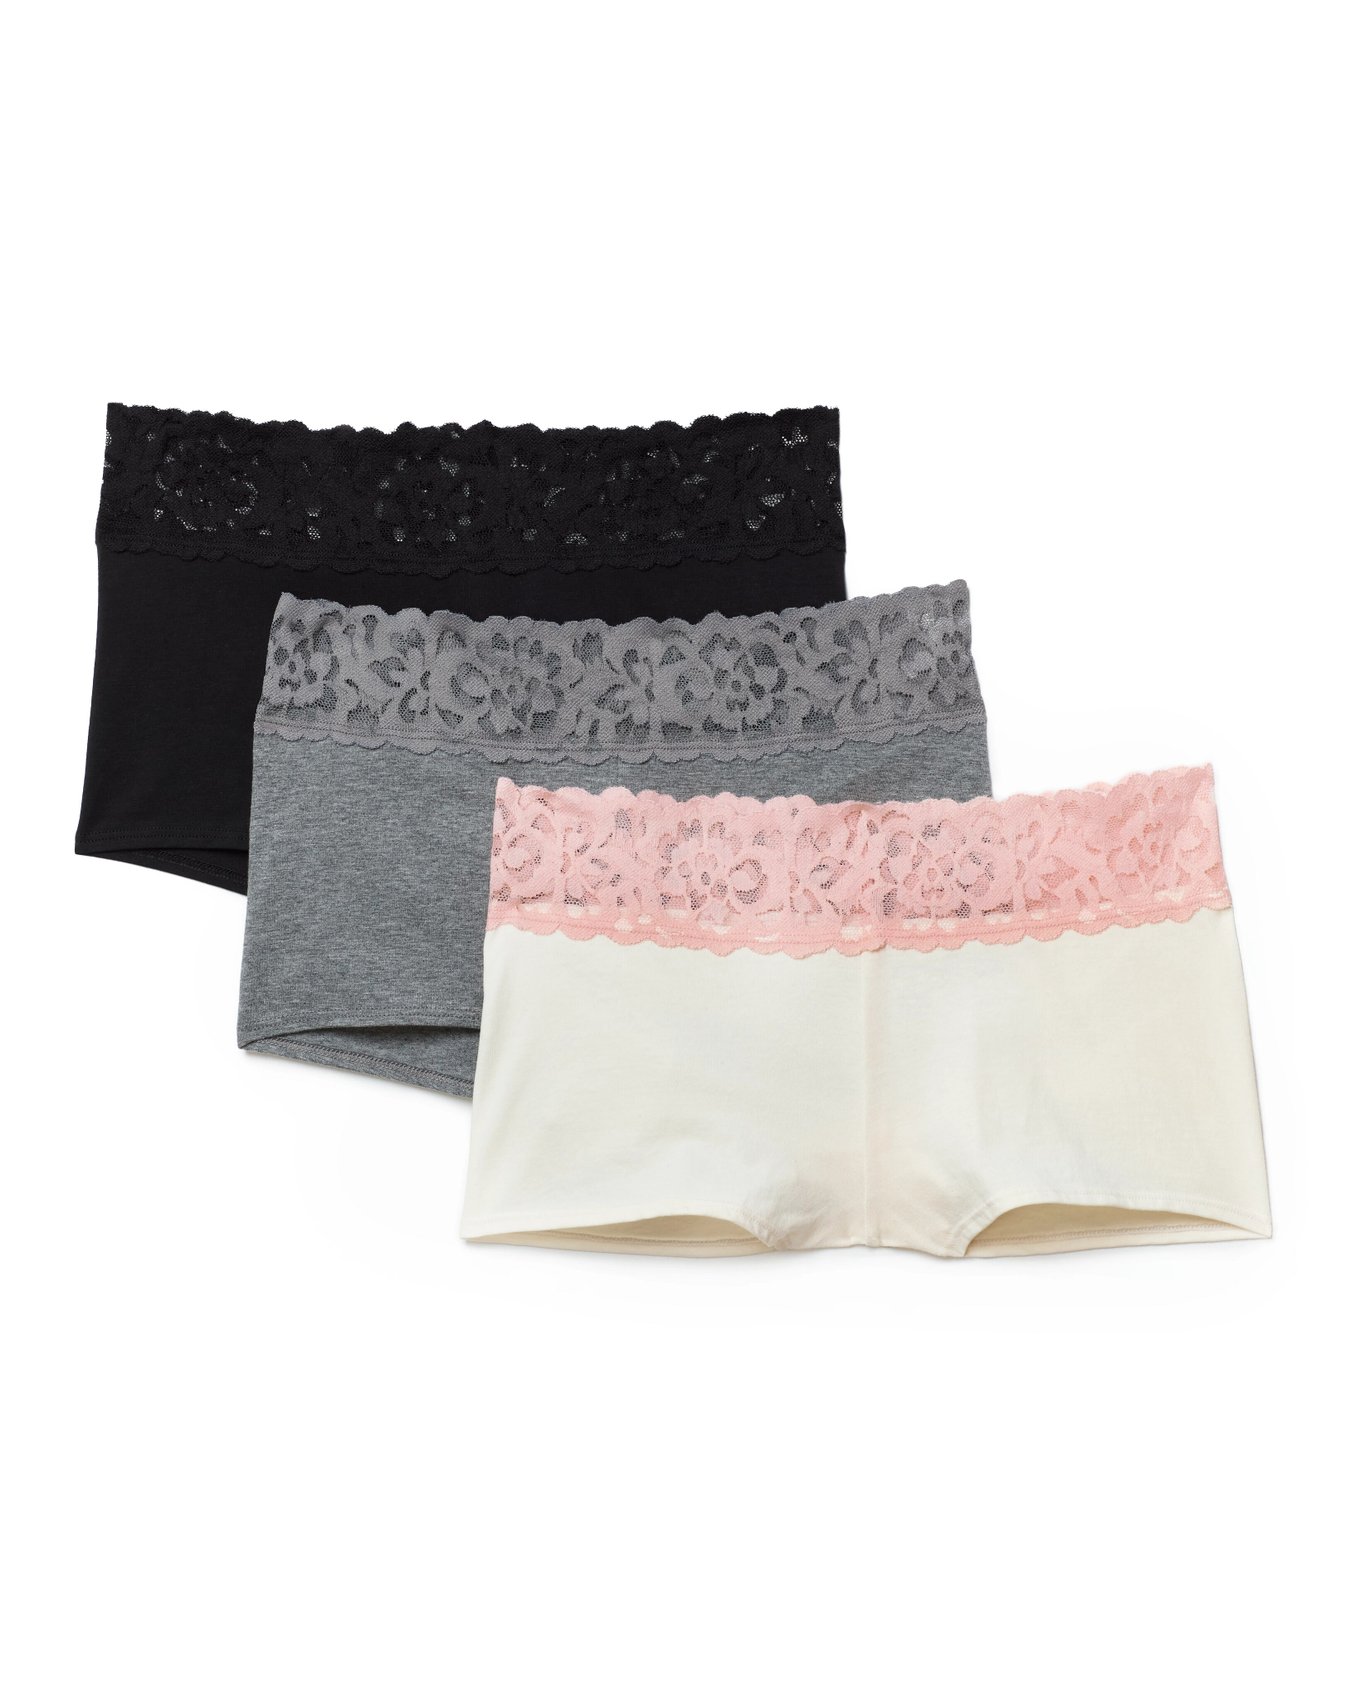 IN CARE Green & Grey Cotton Printed Boyshorts Panties - Pack Of 3